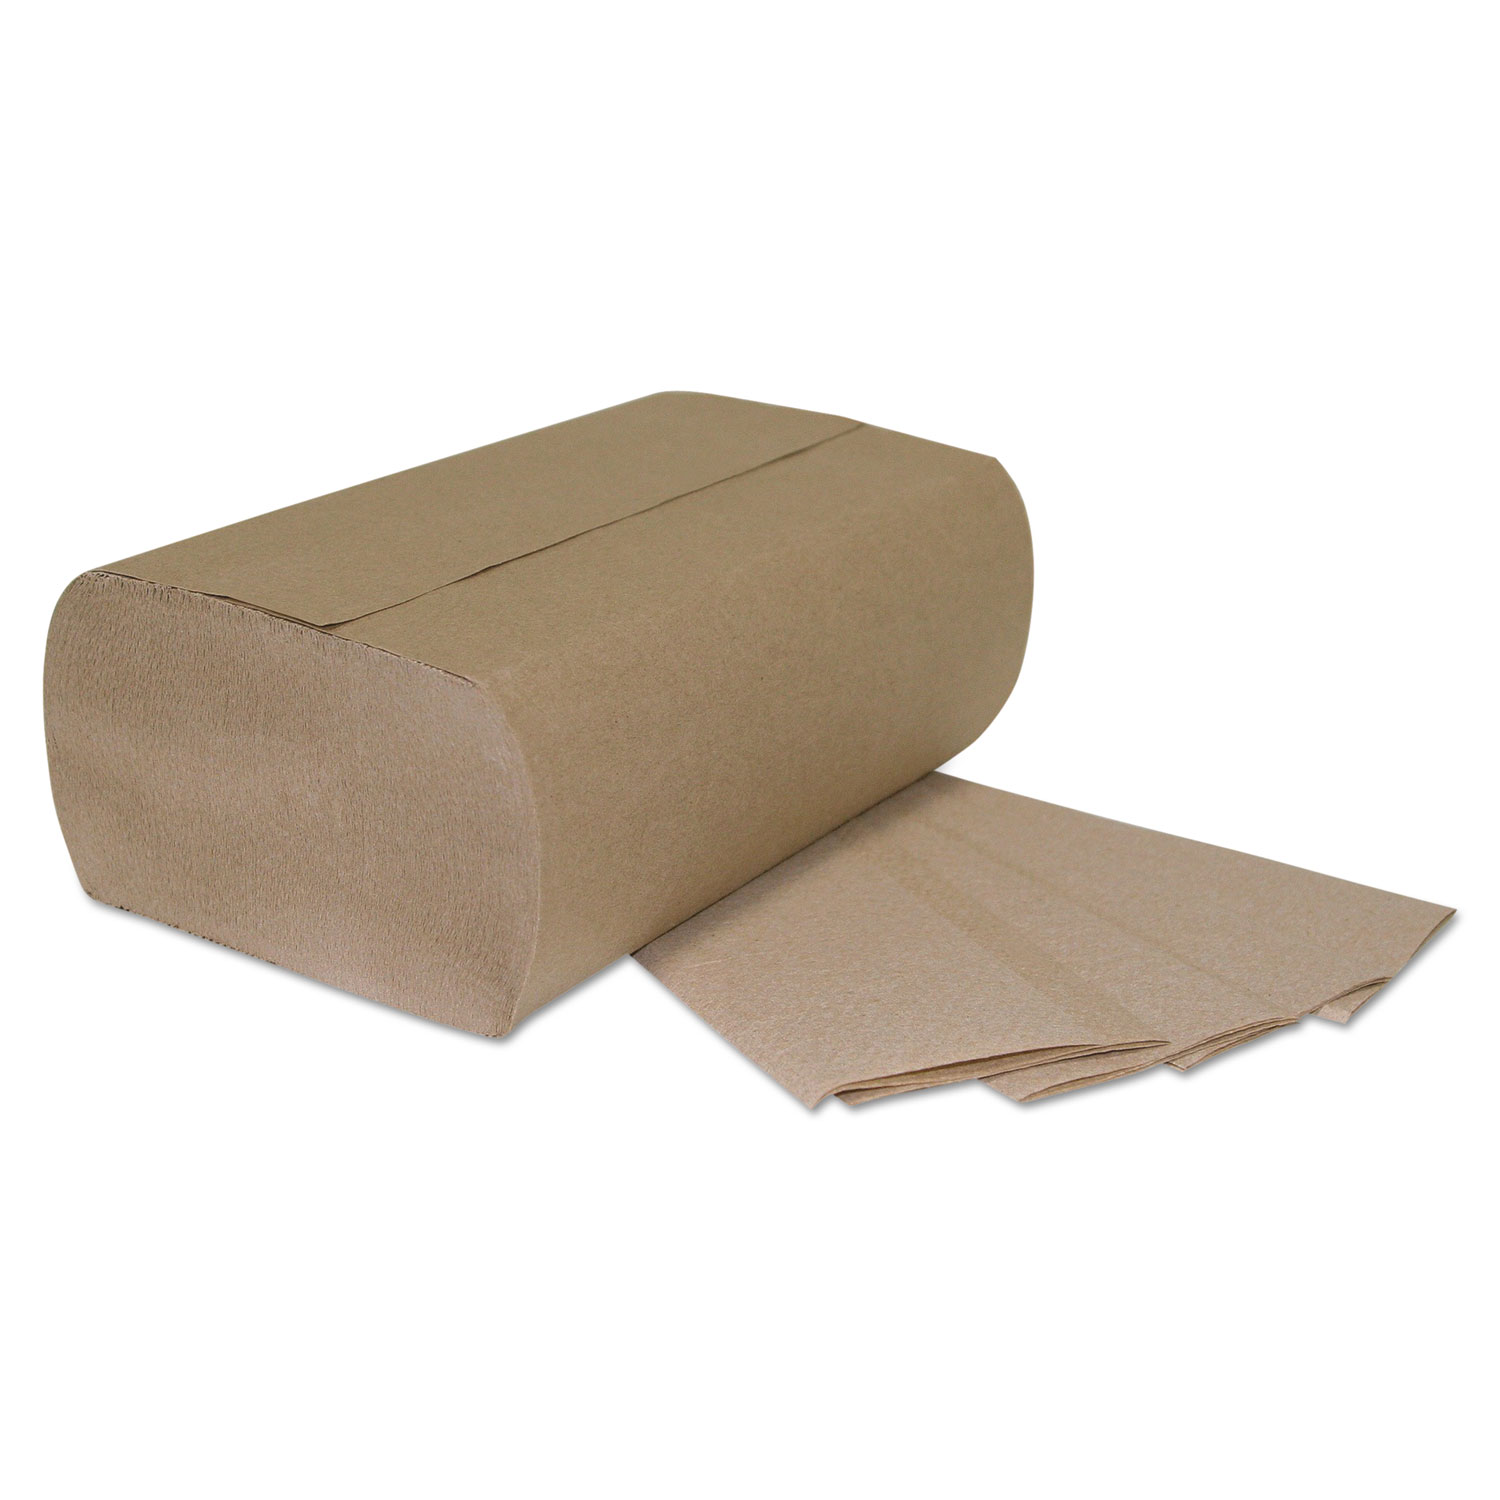 Multi-Fold Paper Towels, 1-Ply, Brown, 9 1/4 x 9 1/4, 250/Pack